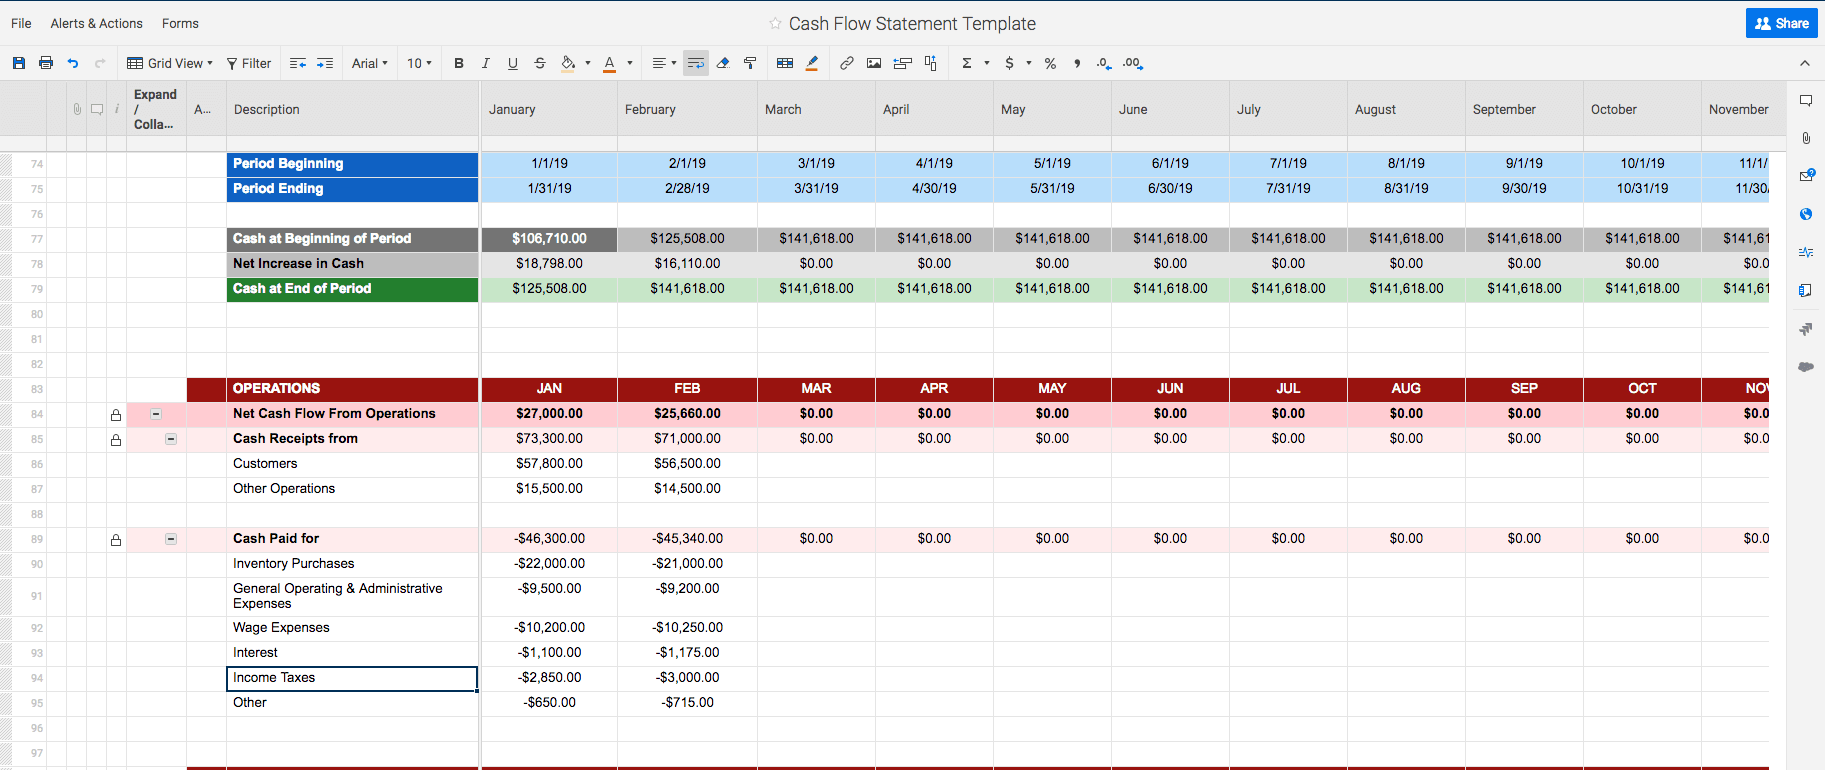 How To Make Cash Flow Chart In Excel